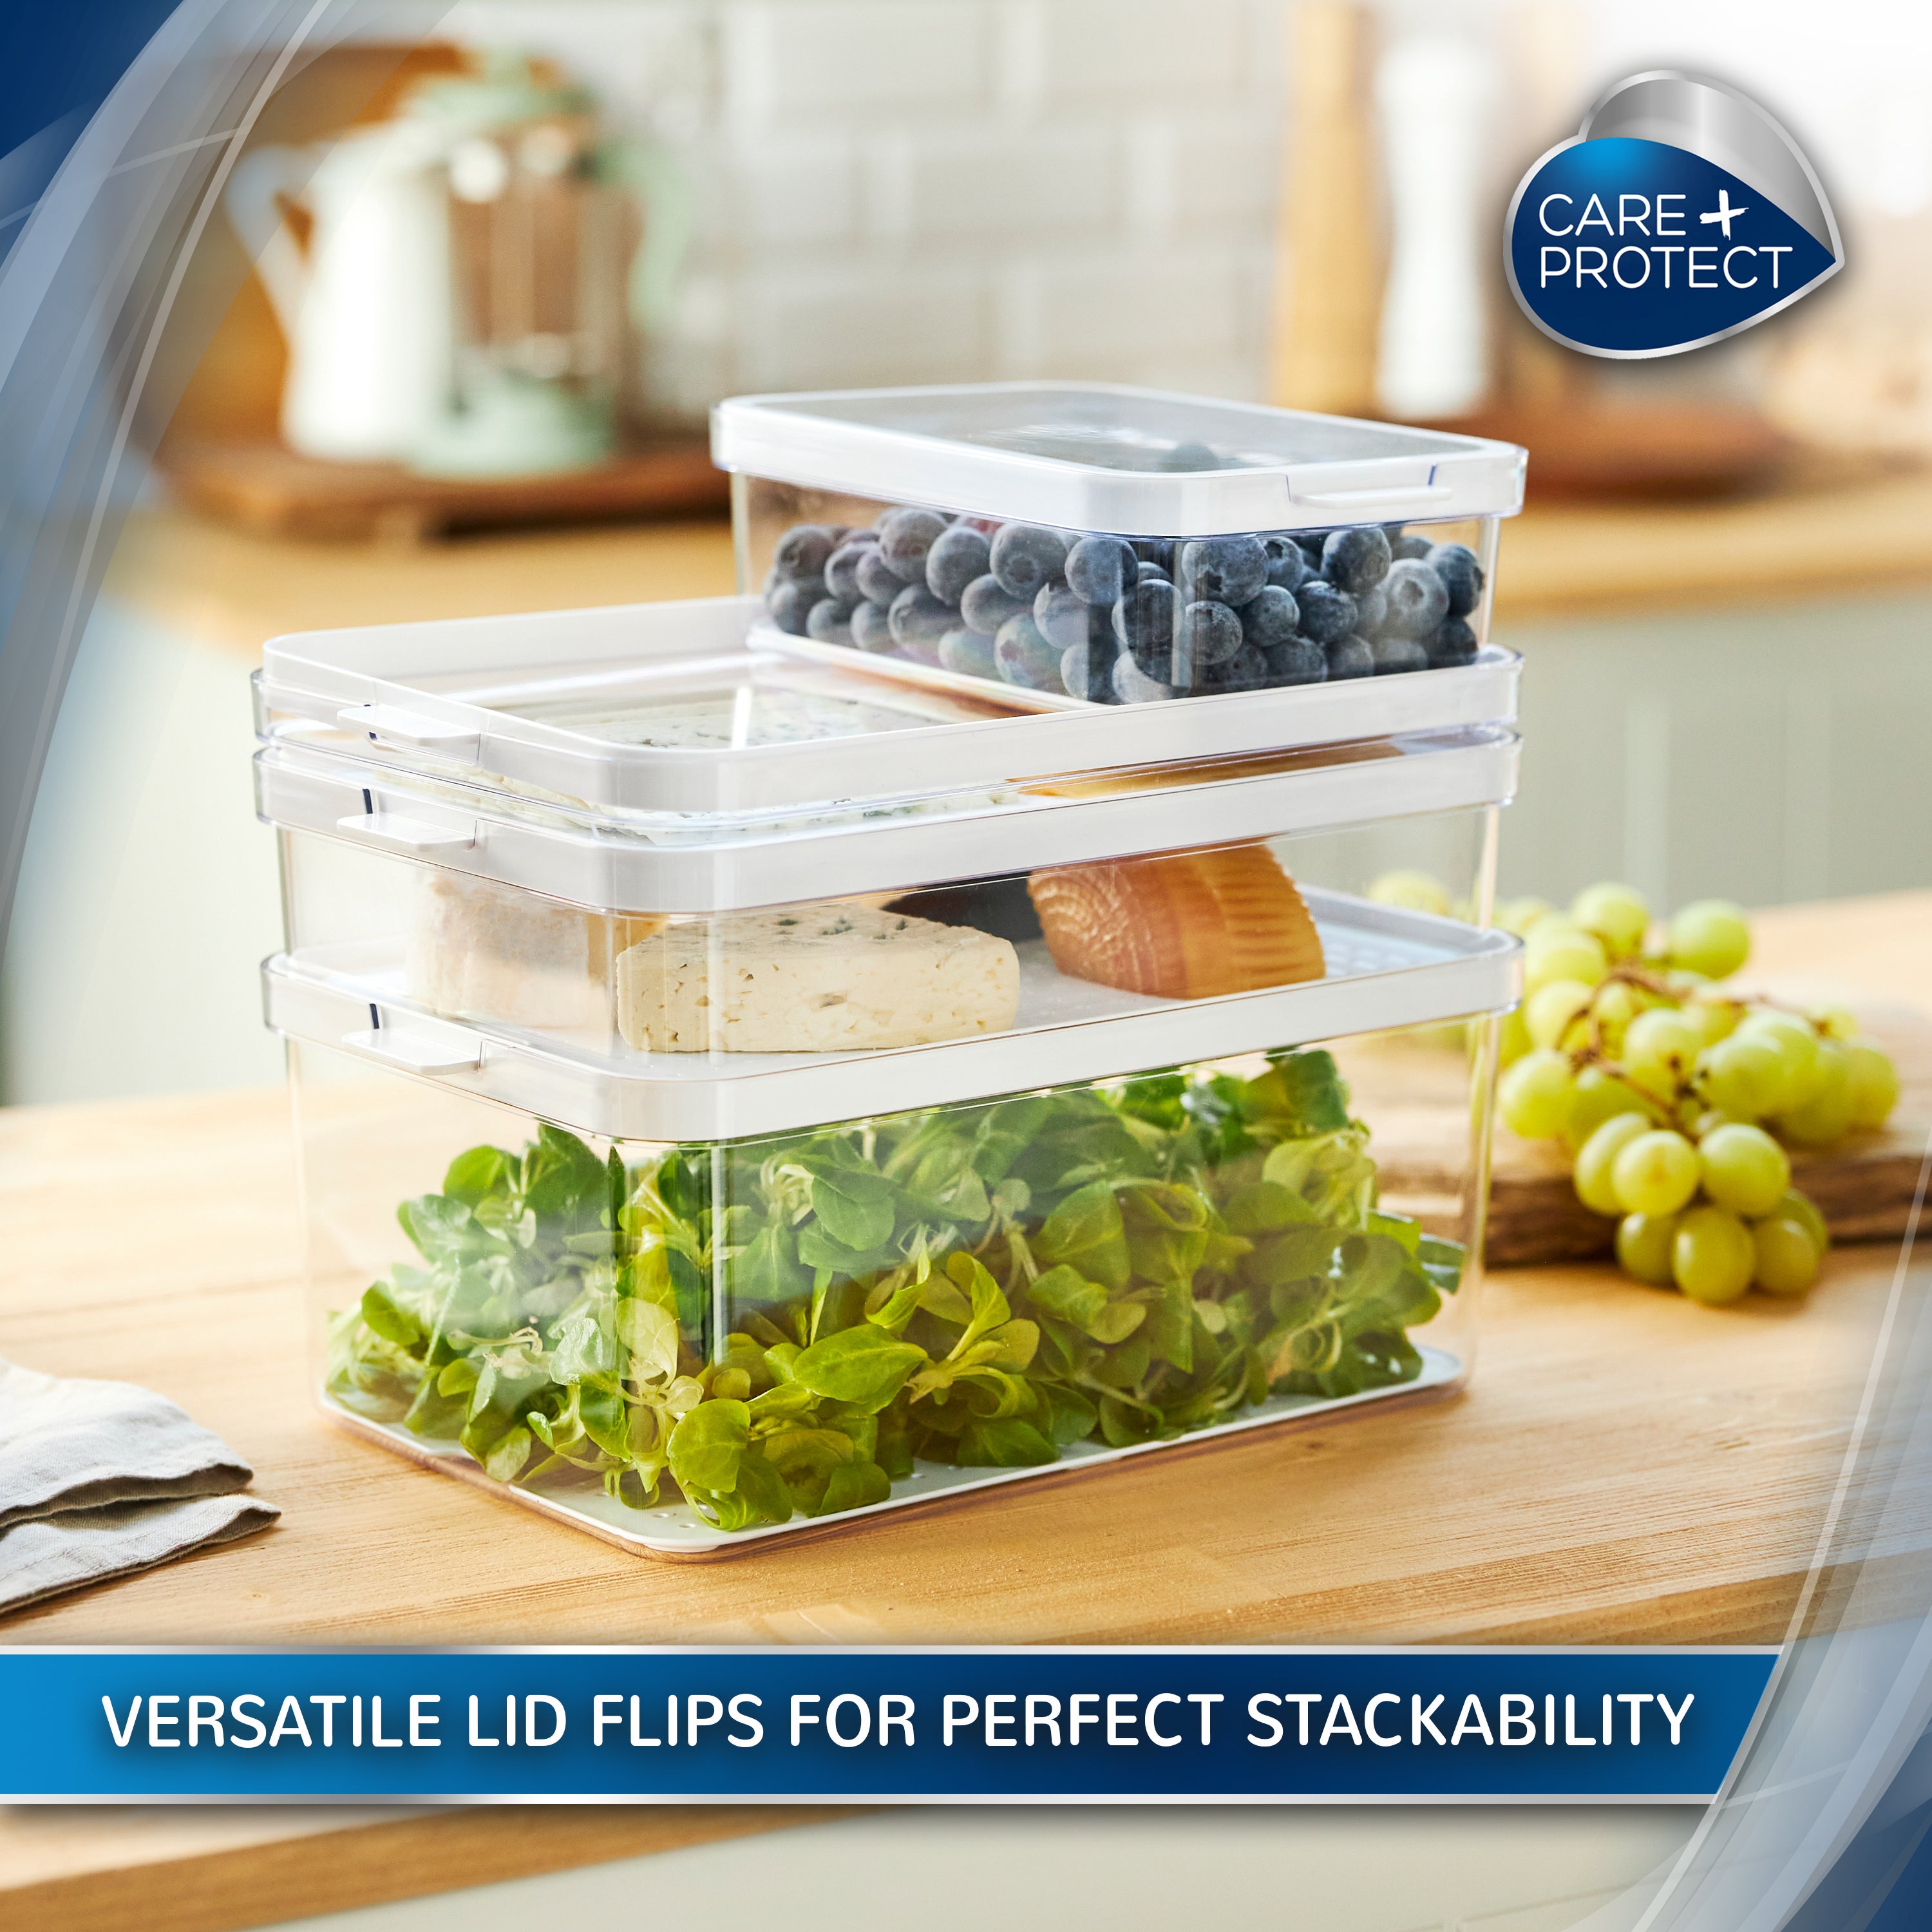 Care + Protect Food Container, 2L